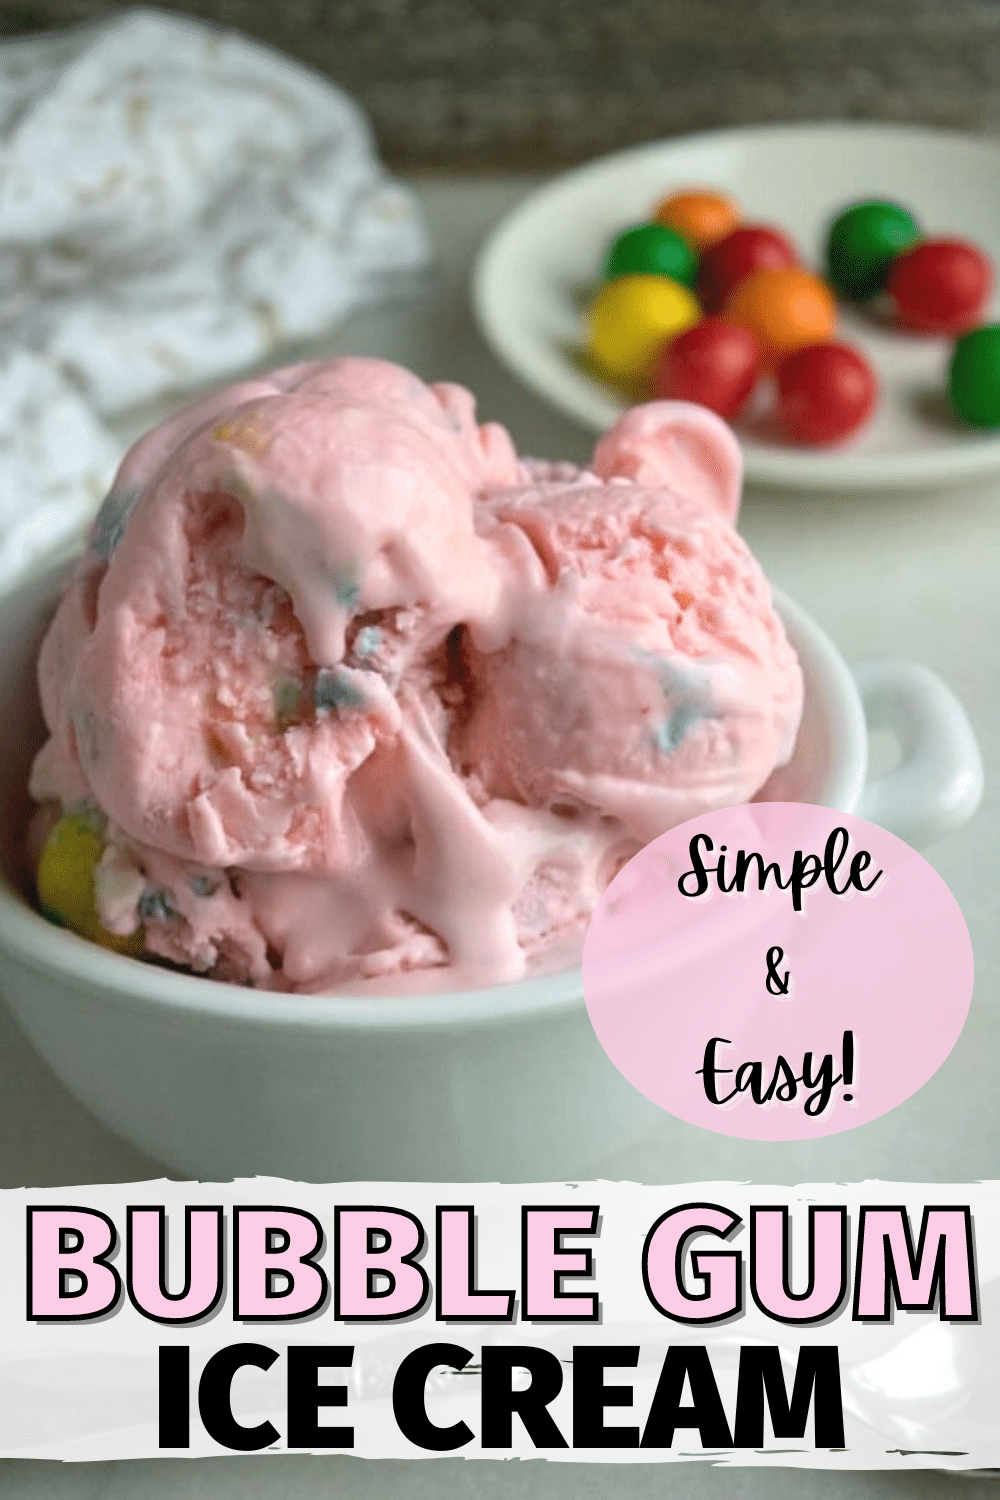 Looking for an easy dessert your kids will love? This Homemade Bubble Gum Ice Cream recipe is a fun and easy treat for kids. #icecream #homemadeicecream #bubblegum via @wondermomwannab